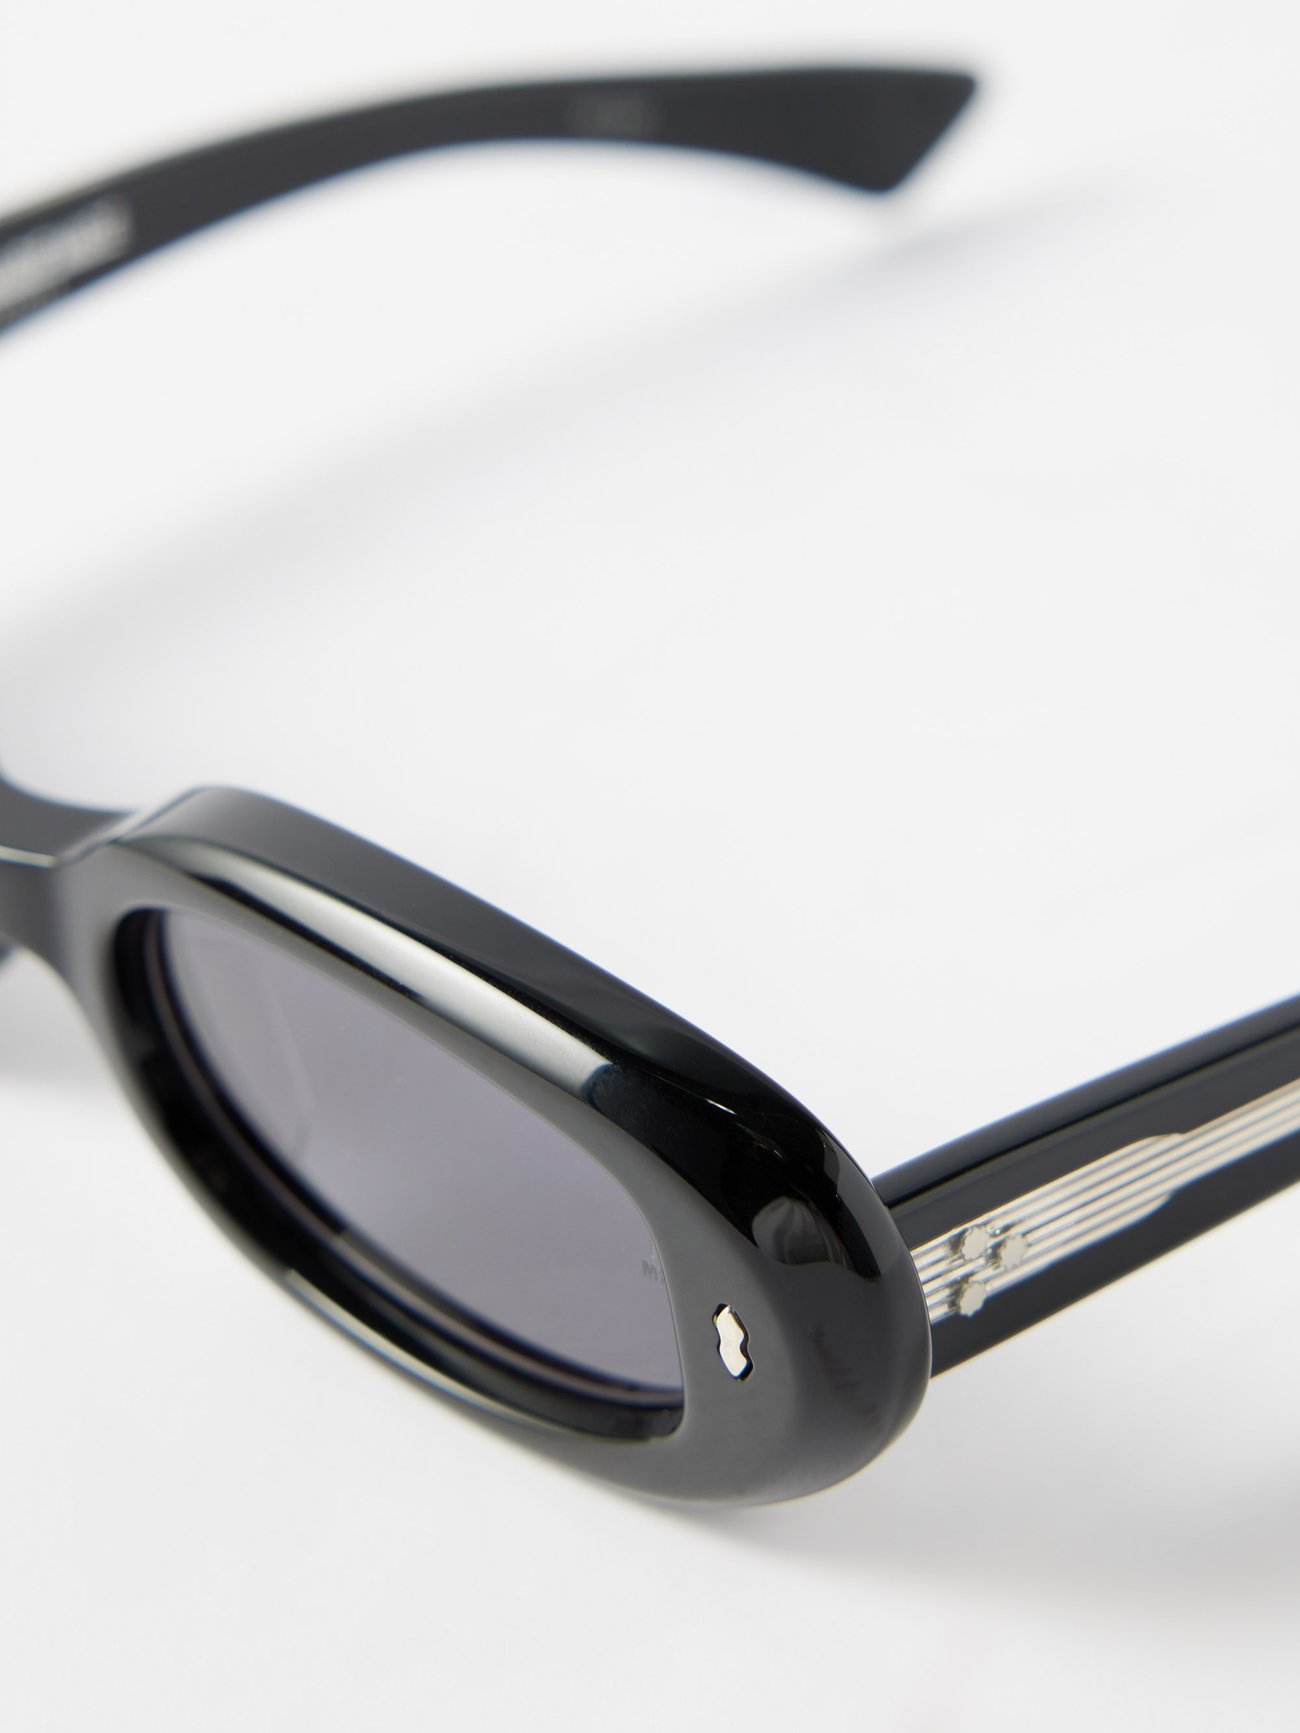 Black Besset oval-acetate sunglasses, Jacques Marie Mage